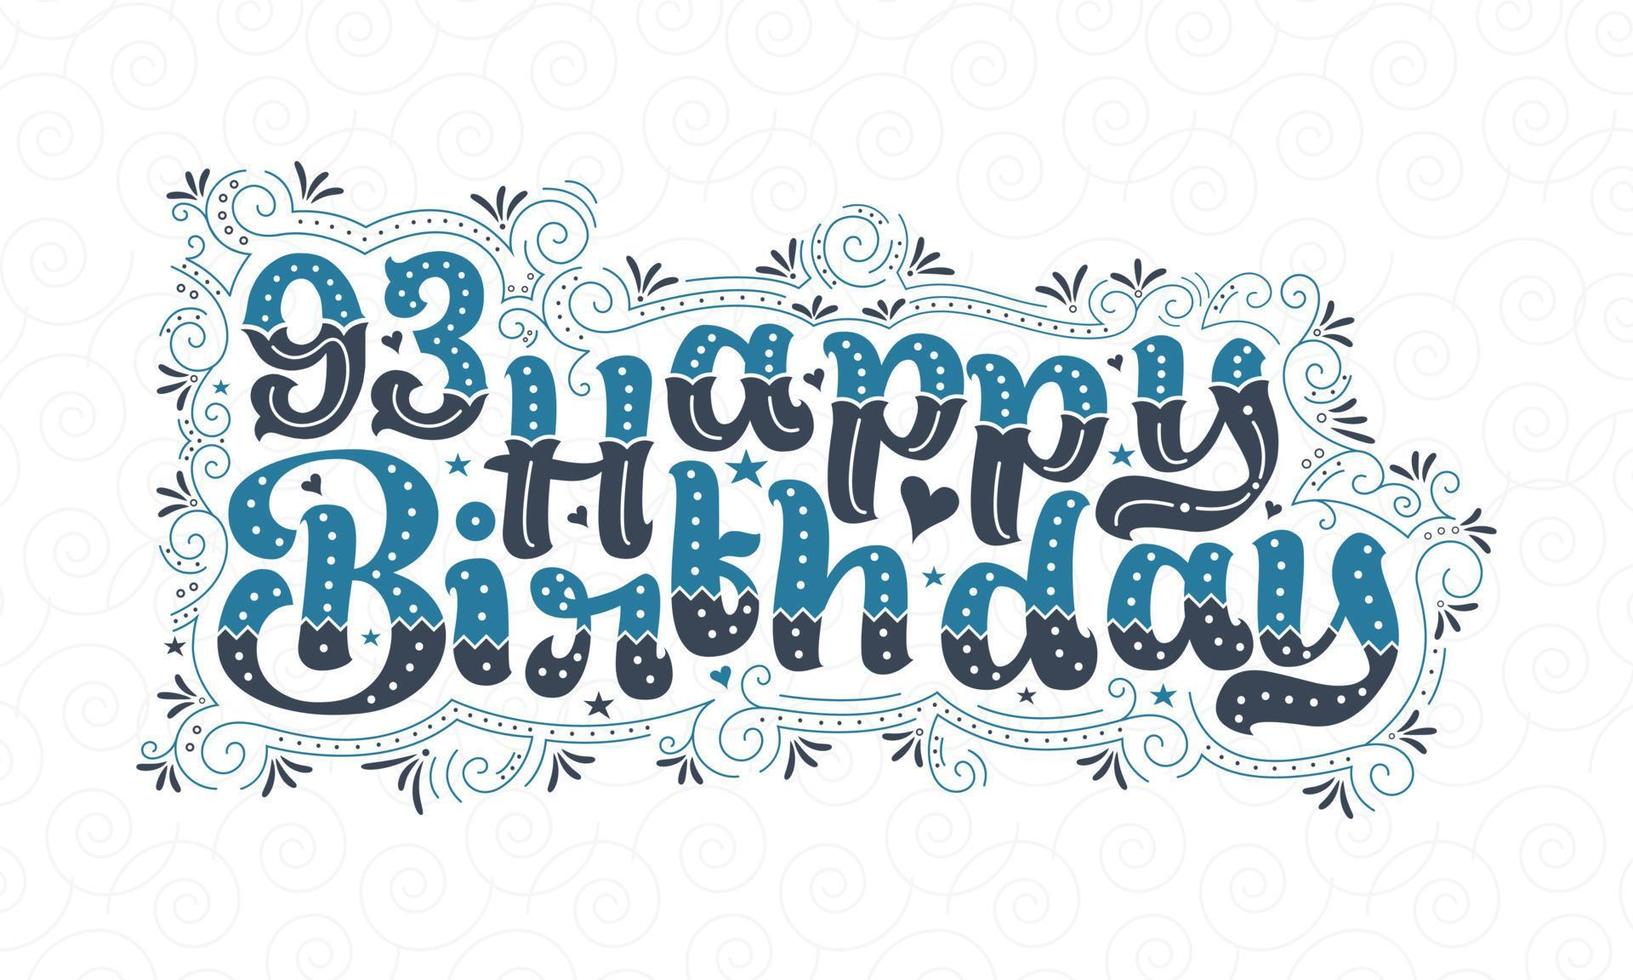 93rd Happy Birthday lettering, 93 years Birthday beautiful typography design with blue and black dots, lines, and leaves. vector